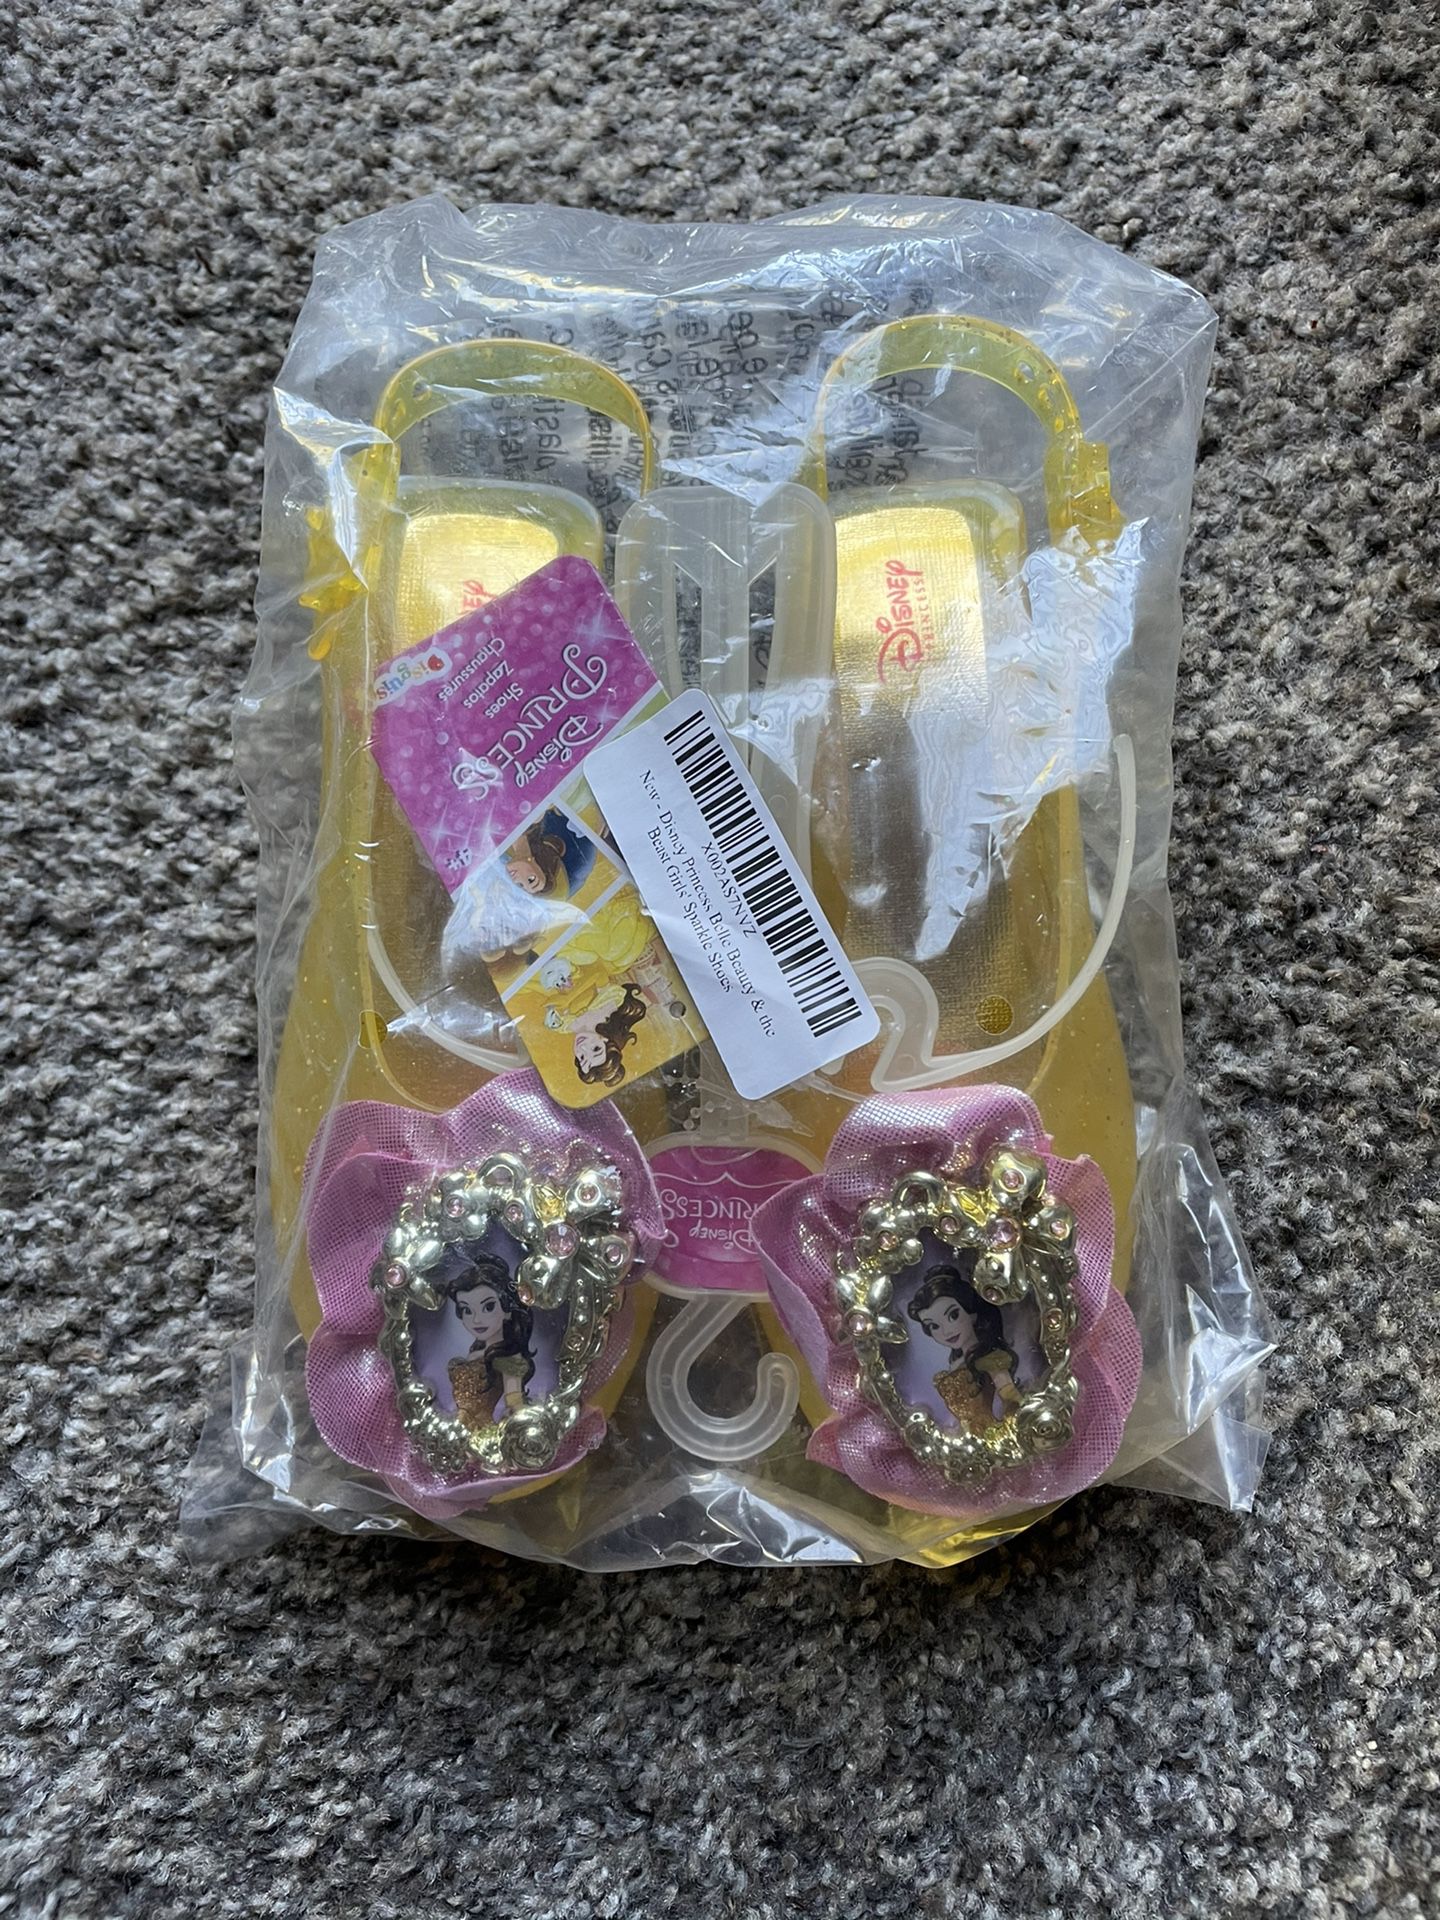 Disney Princess Belle, Beauty And The beast Sparkle Shoes